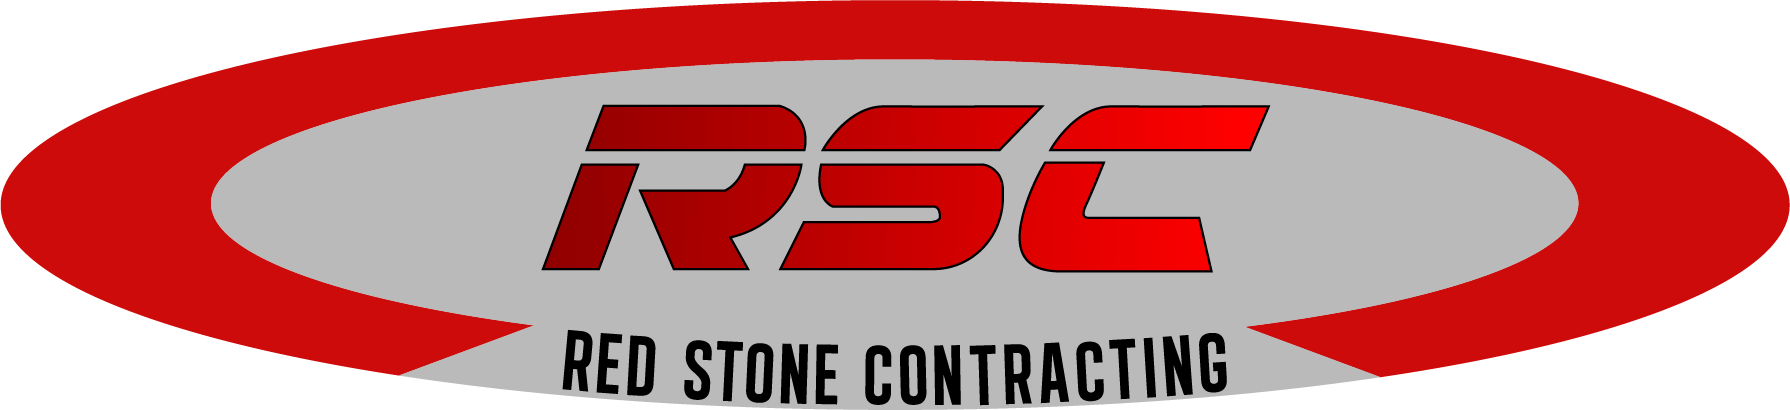 Red Stone Contracting Logo